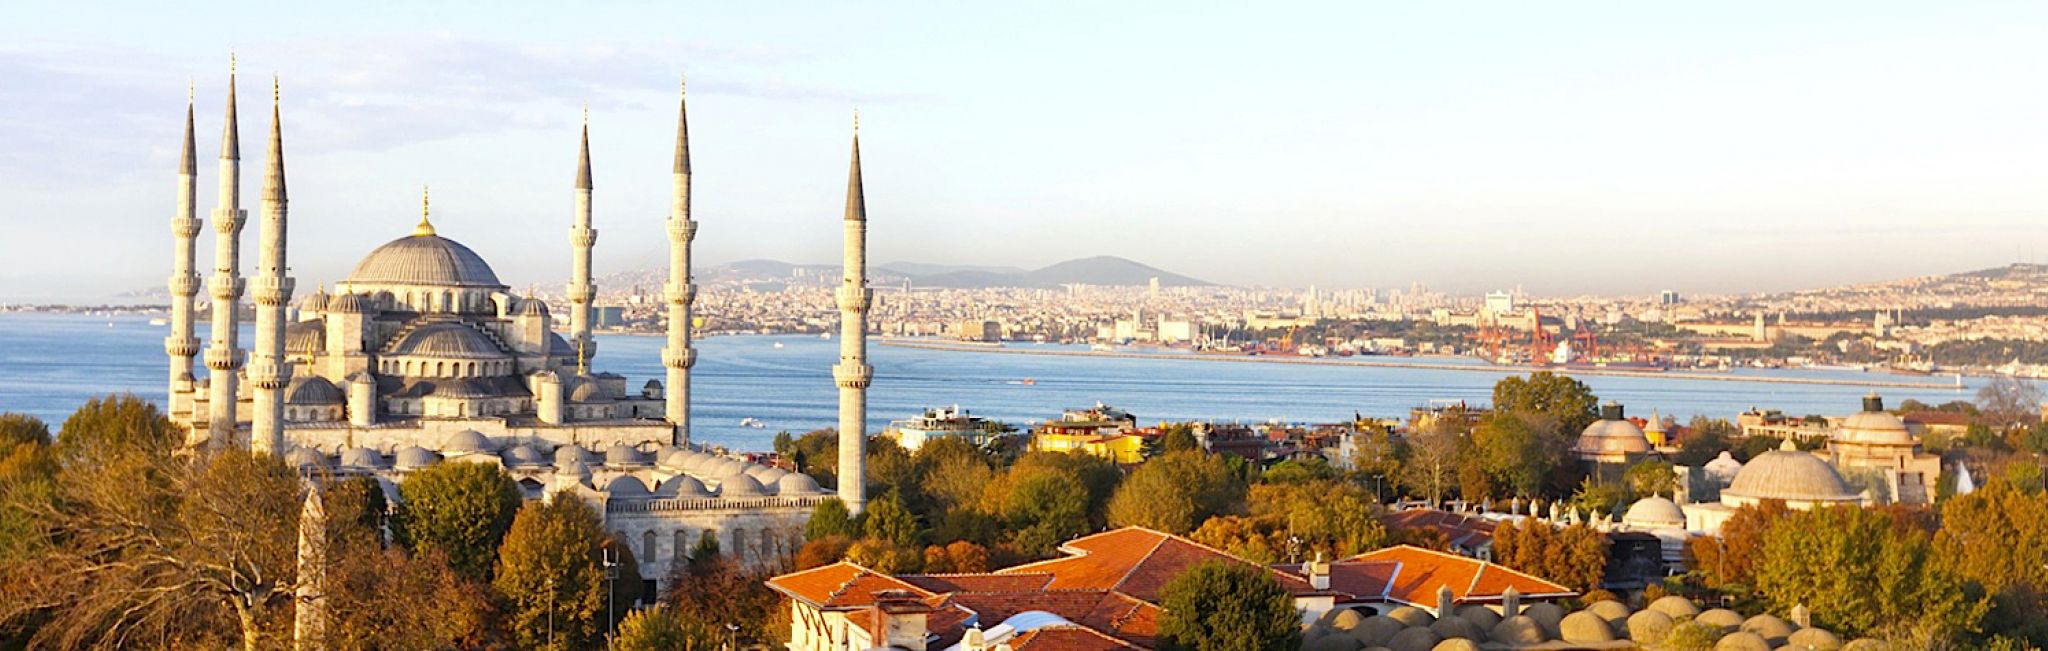 Turkey Tours, Vacations & Luxury Travel Packages 2015-2016 | Zicasso